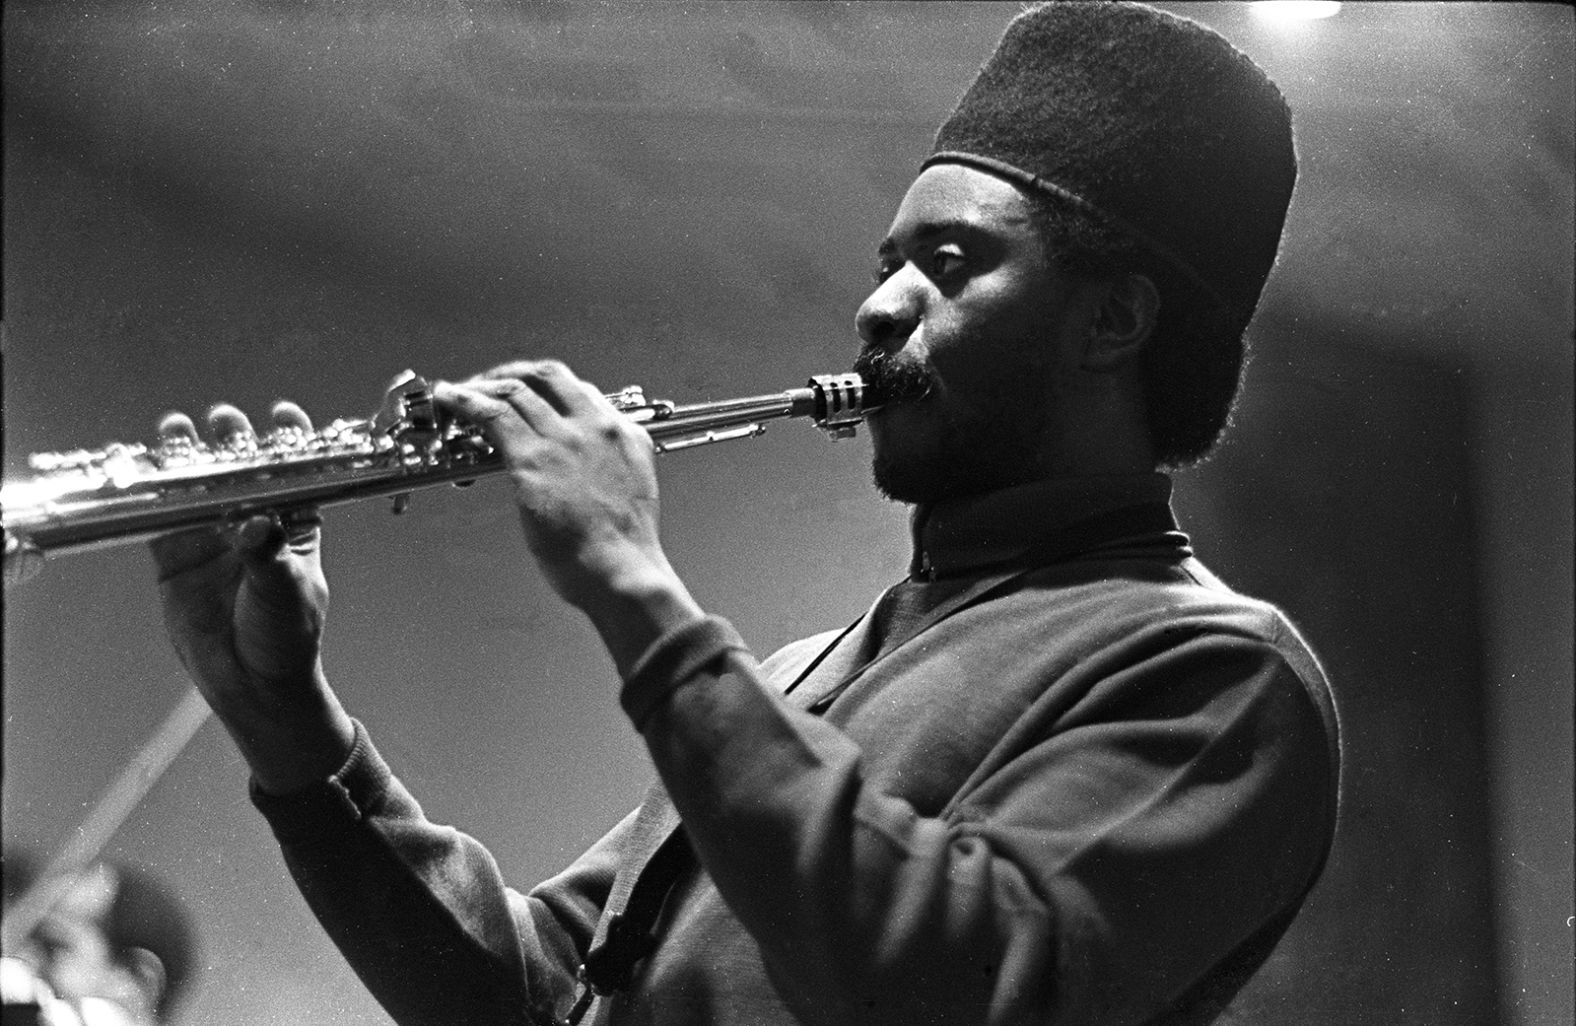 Jazz saxophonist <a href="index.php?page=&url=https%3A%2F%2Fwww.cnn.com%2F2022%2F09%2F24%2Fentertainment%2Fpharoah-sanders-death%2Findex.html" target="_blank">Pharoah Sanders,</a> known for his collaborations with jazz legend John Coltrane throughout the 1960s, died on September 24. He was 81.